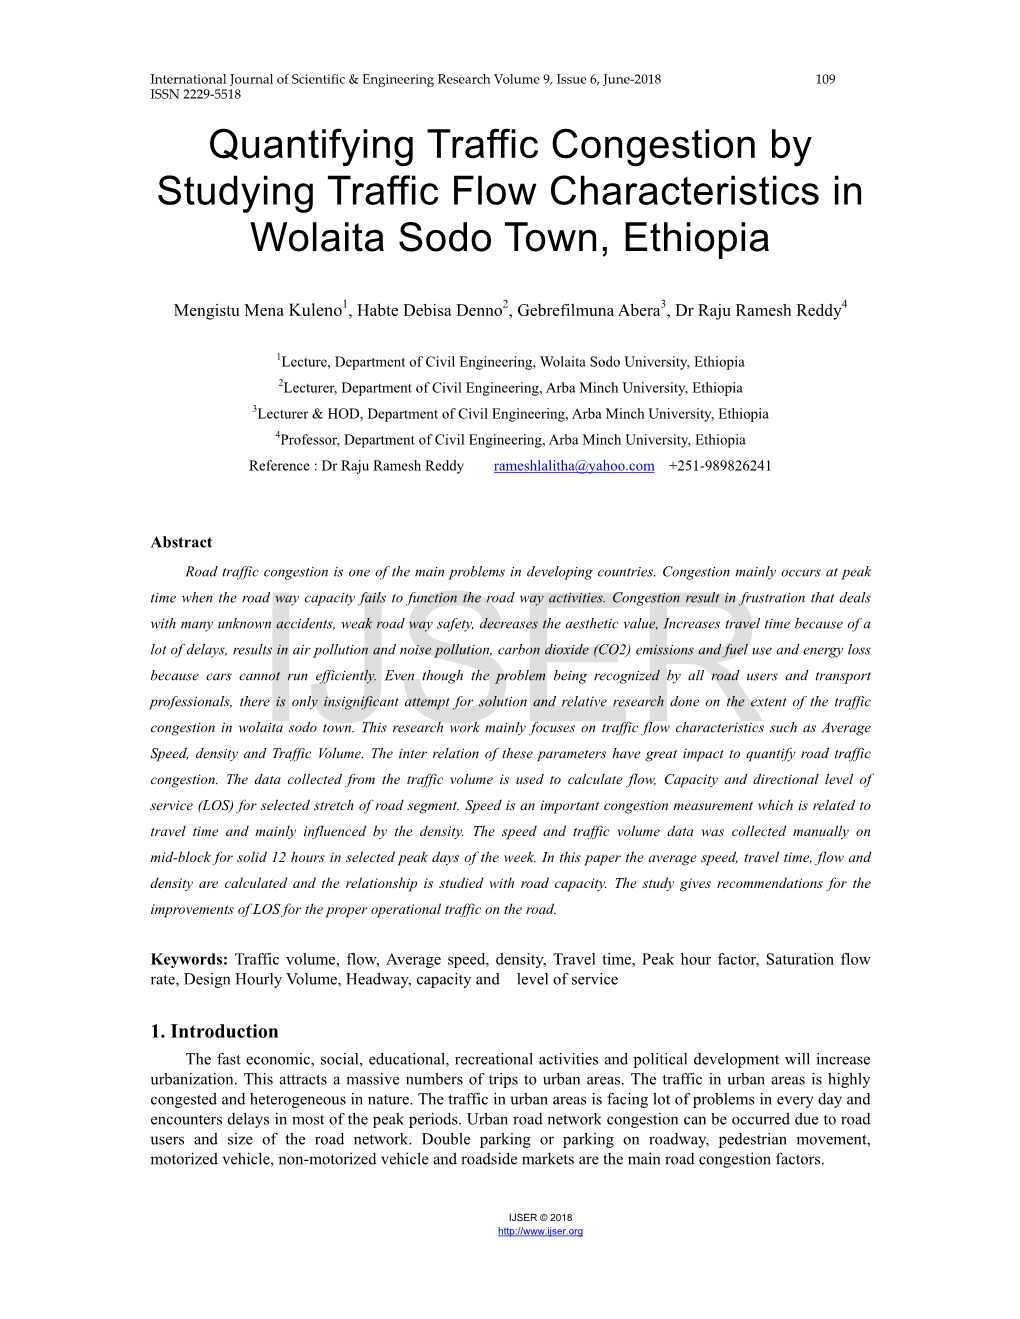 Quantifying Traffic Congestion by Studying Traffic Flow Characteristics in Wolaita Sodo Town, Ethiopia